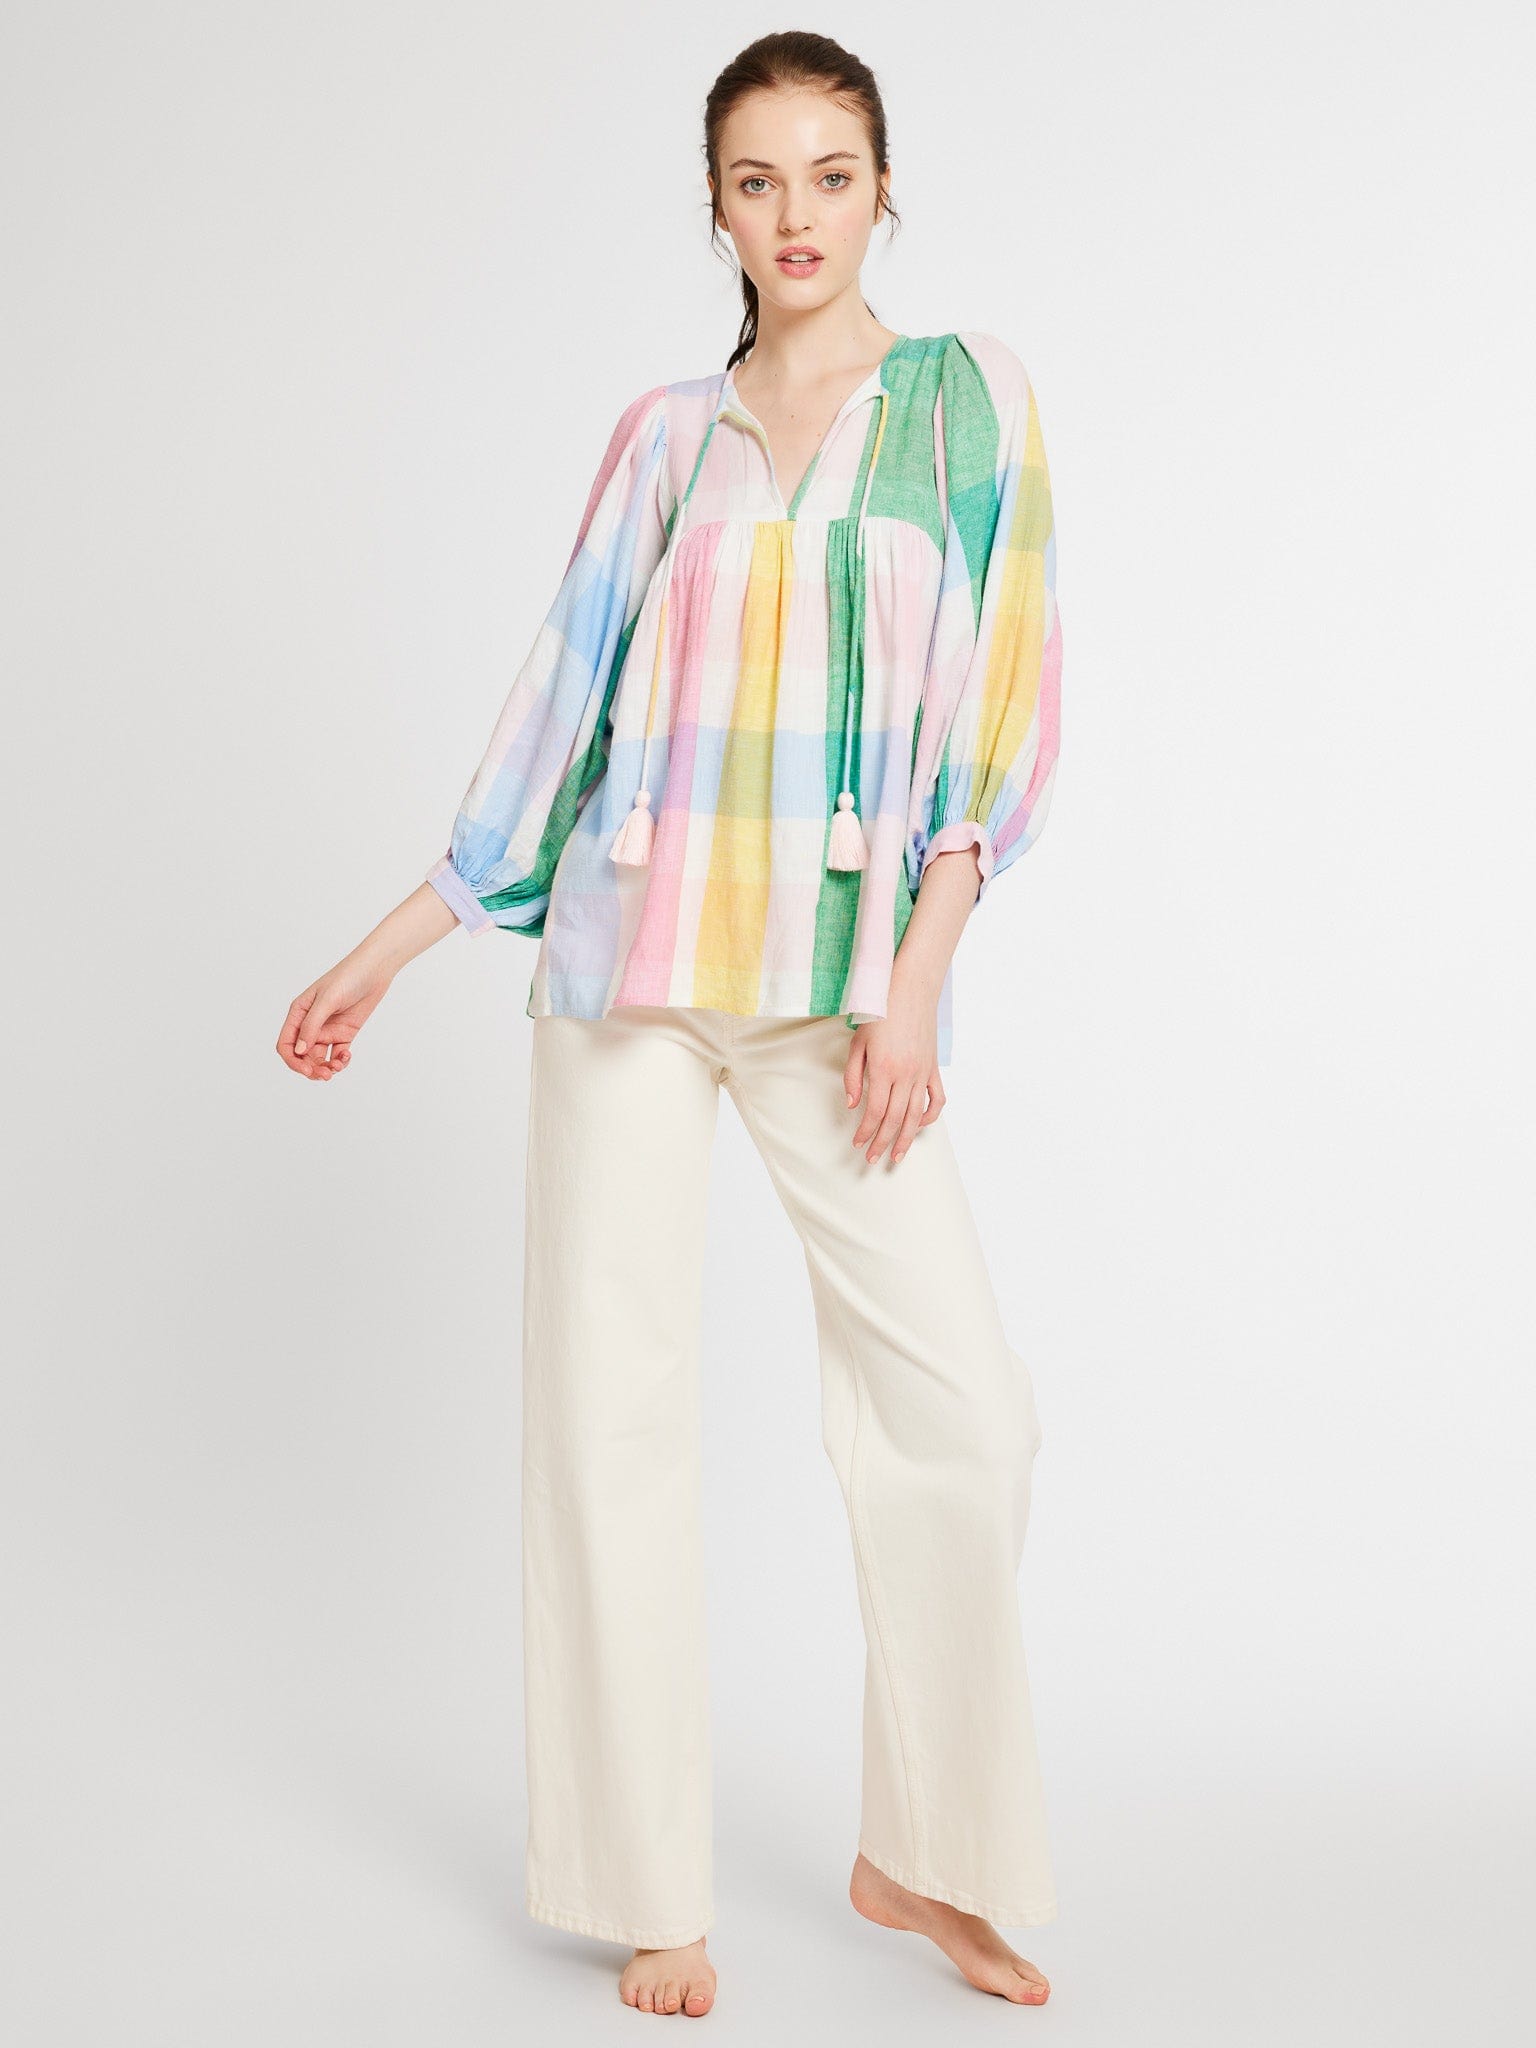 MILLE Clothing Charlie Top in Pastel Plaid